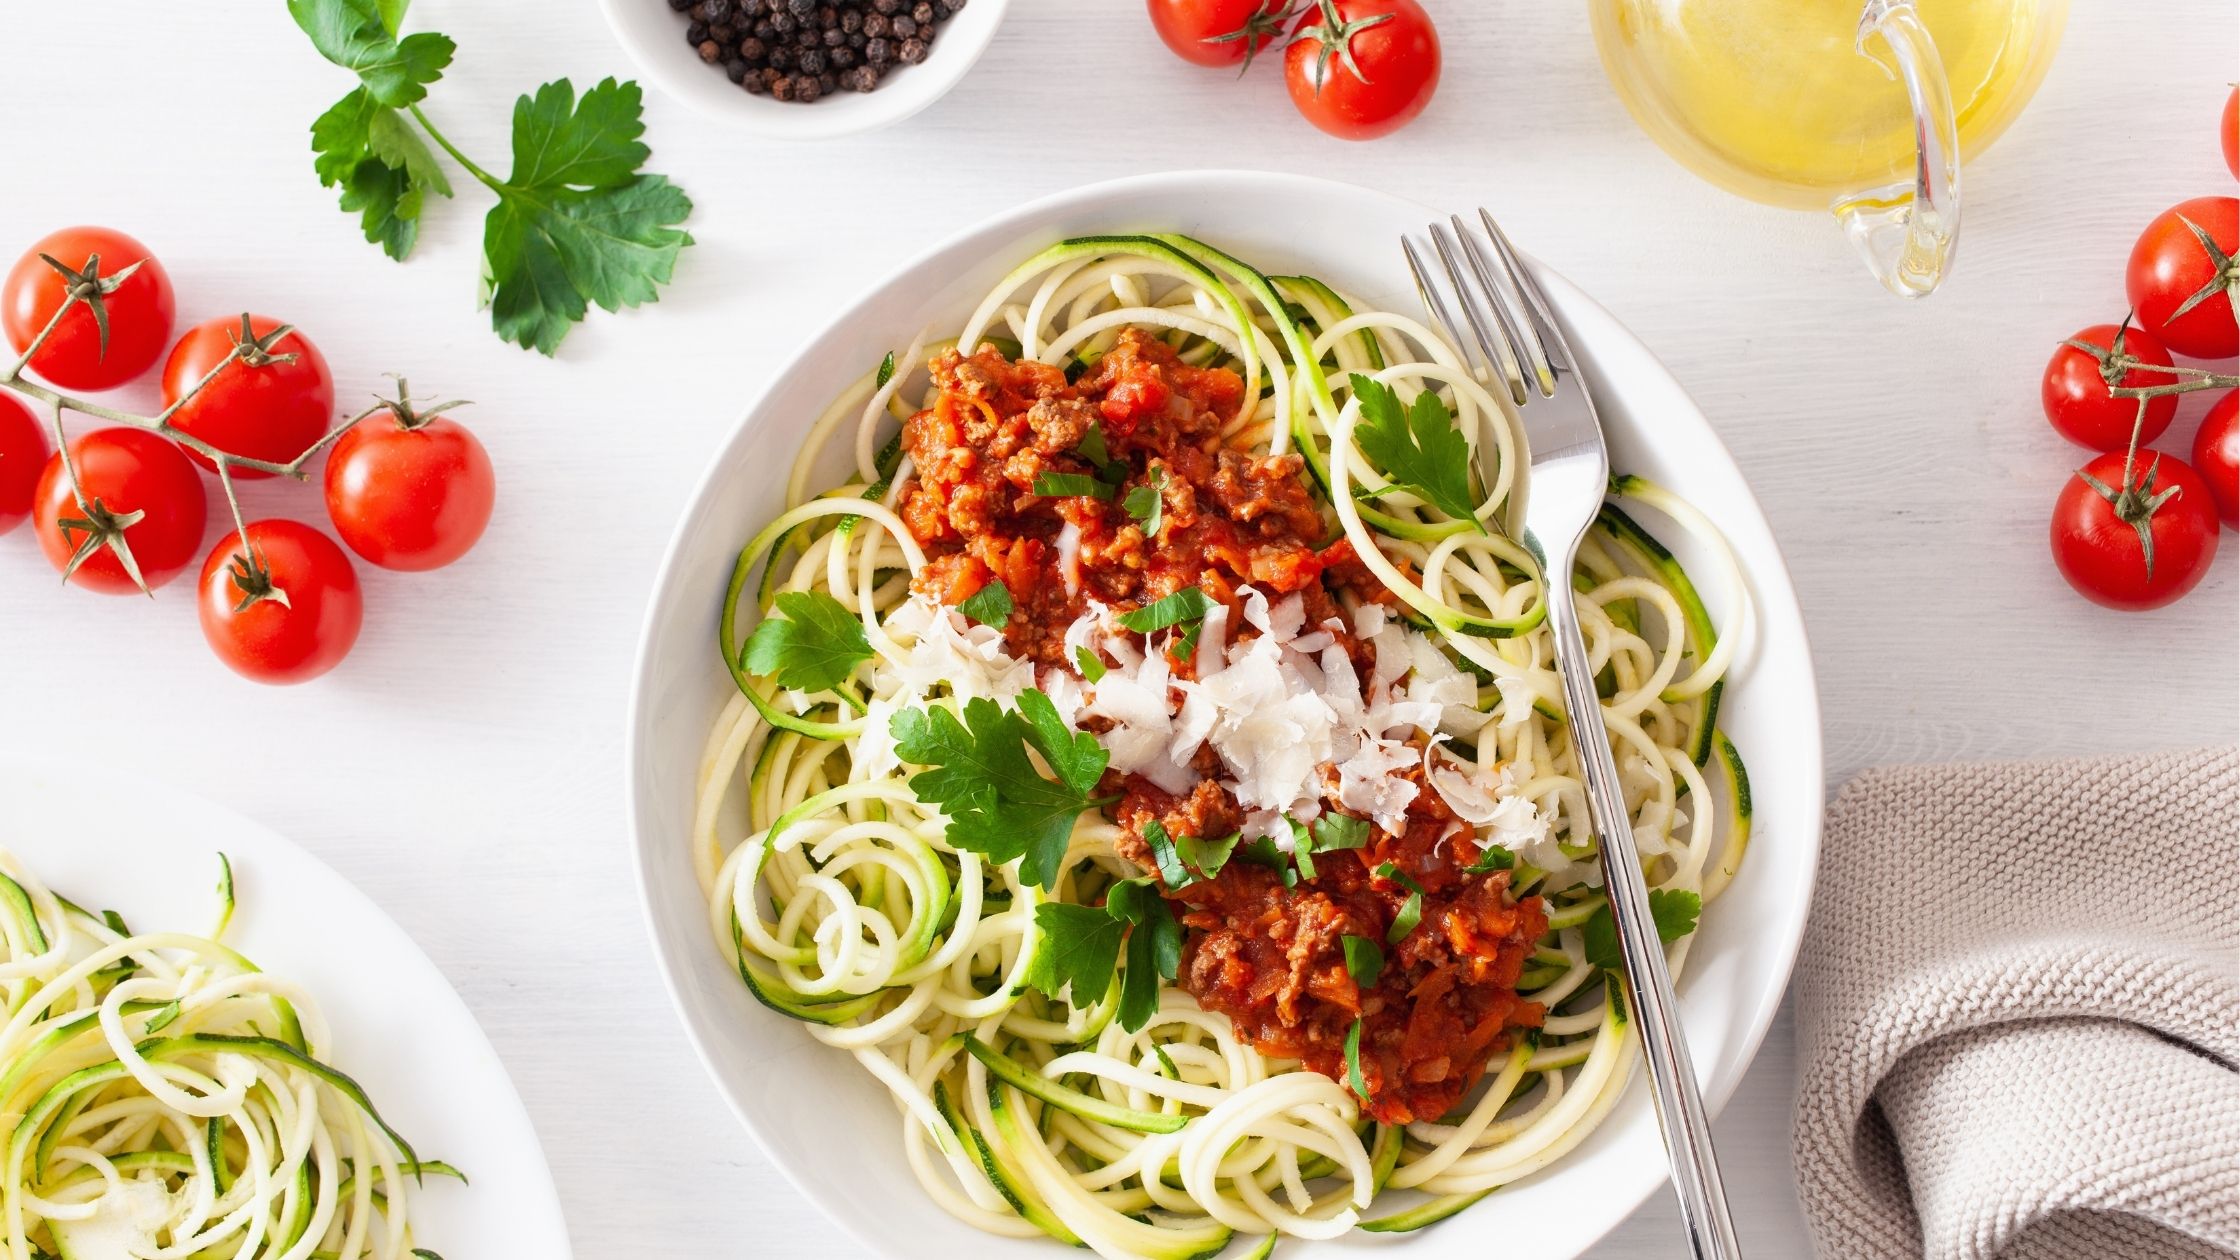 Zucchini Noodles with Tomato Sauce